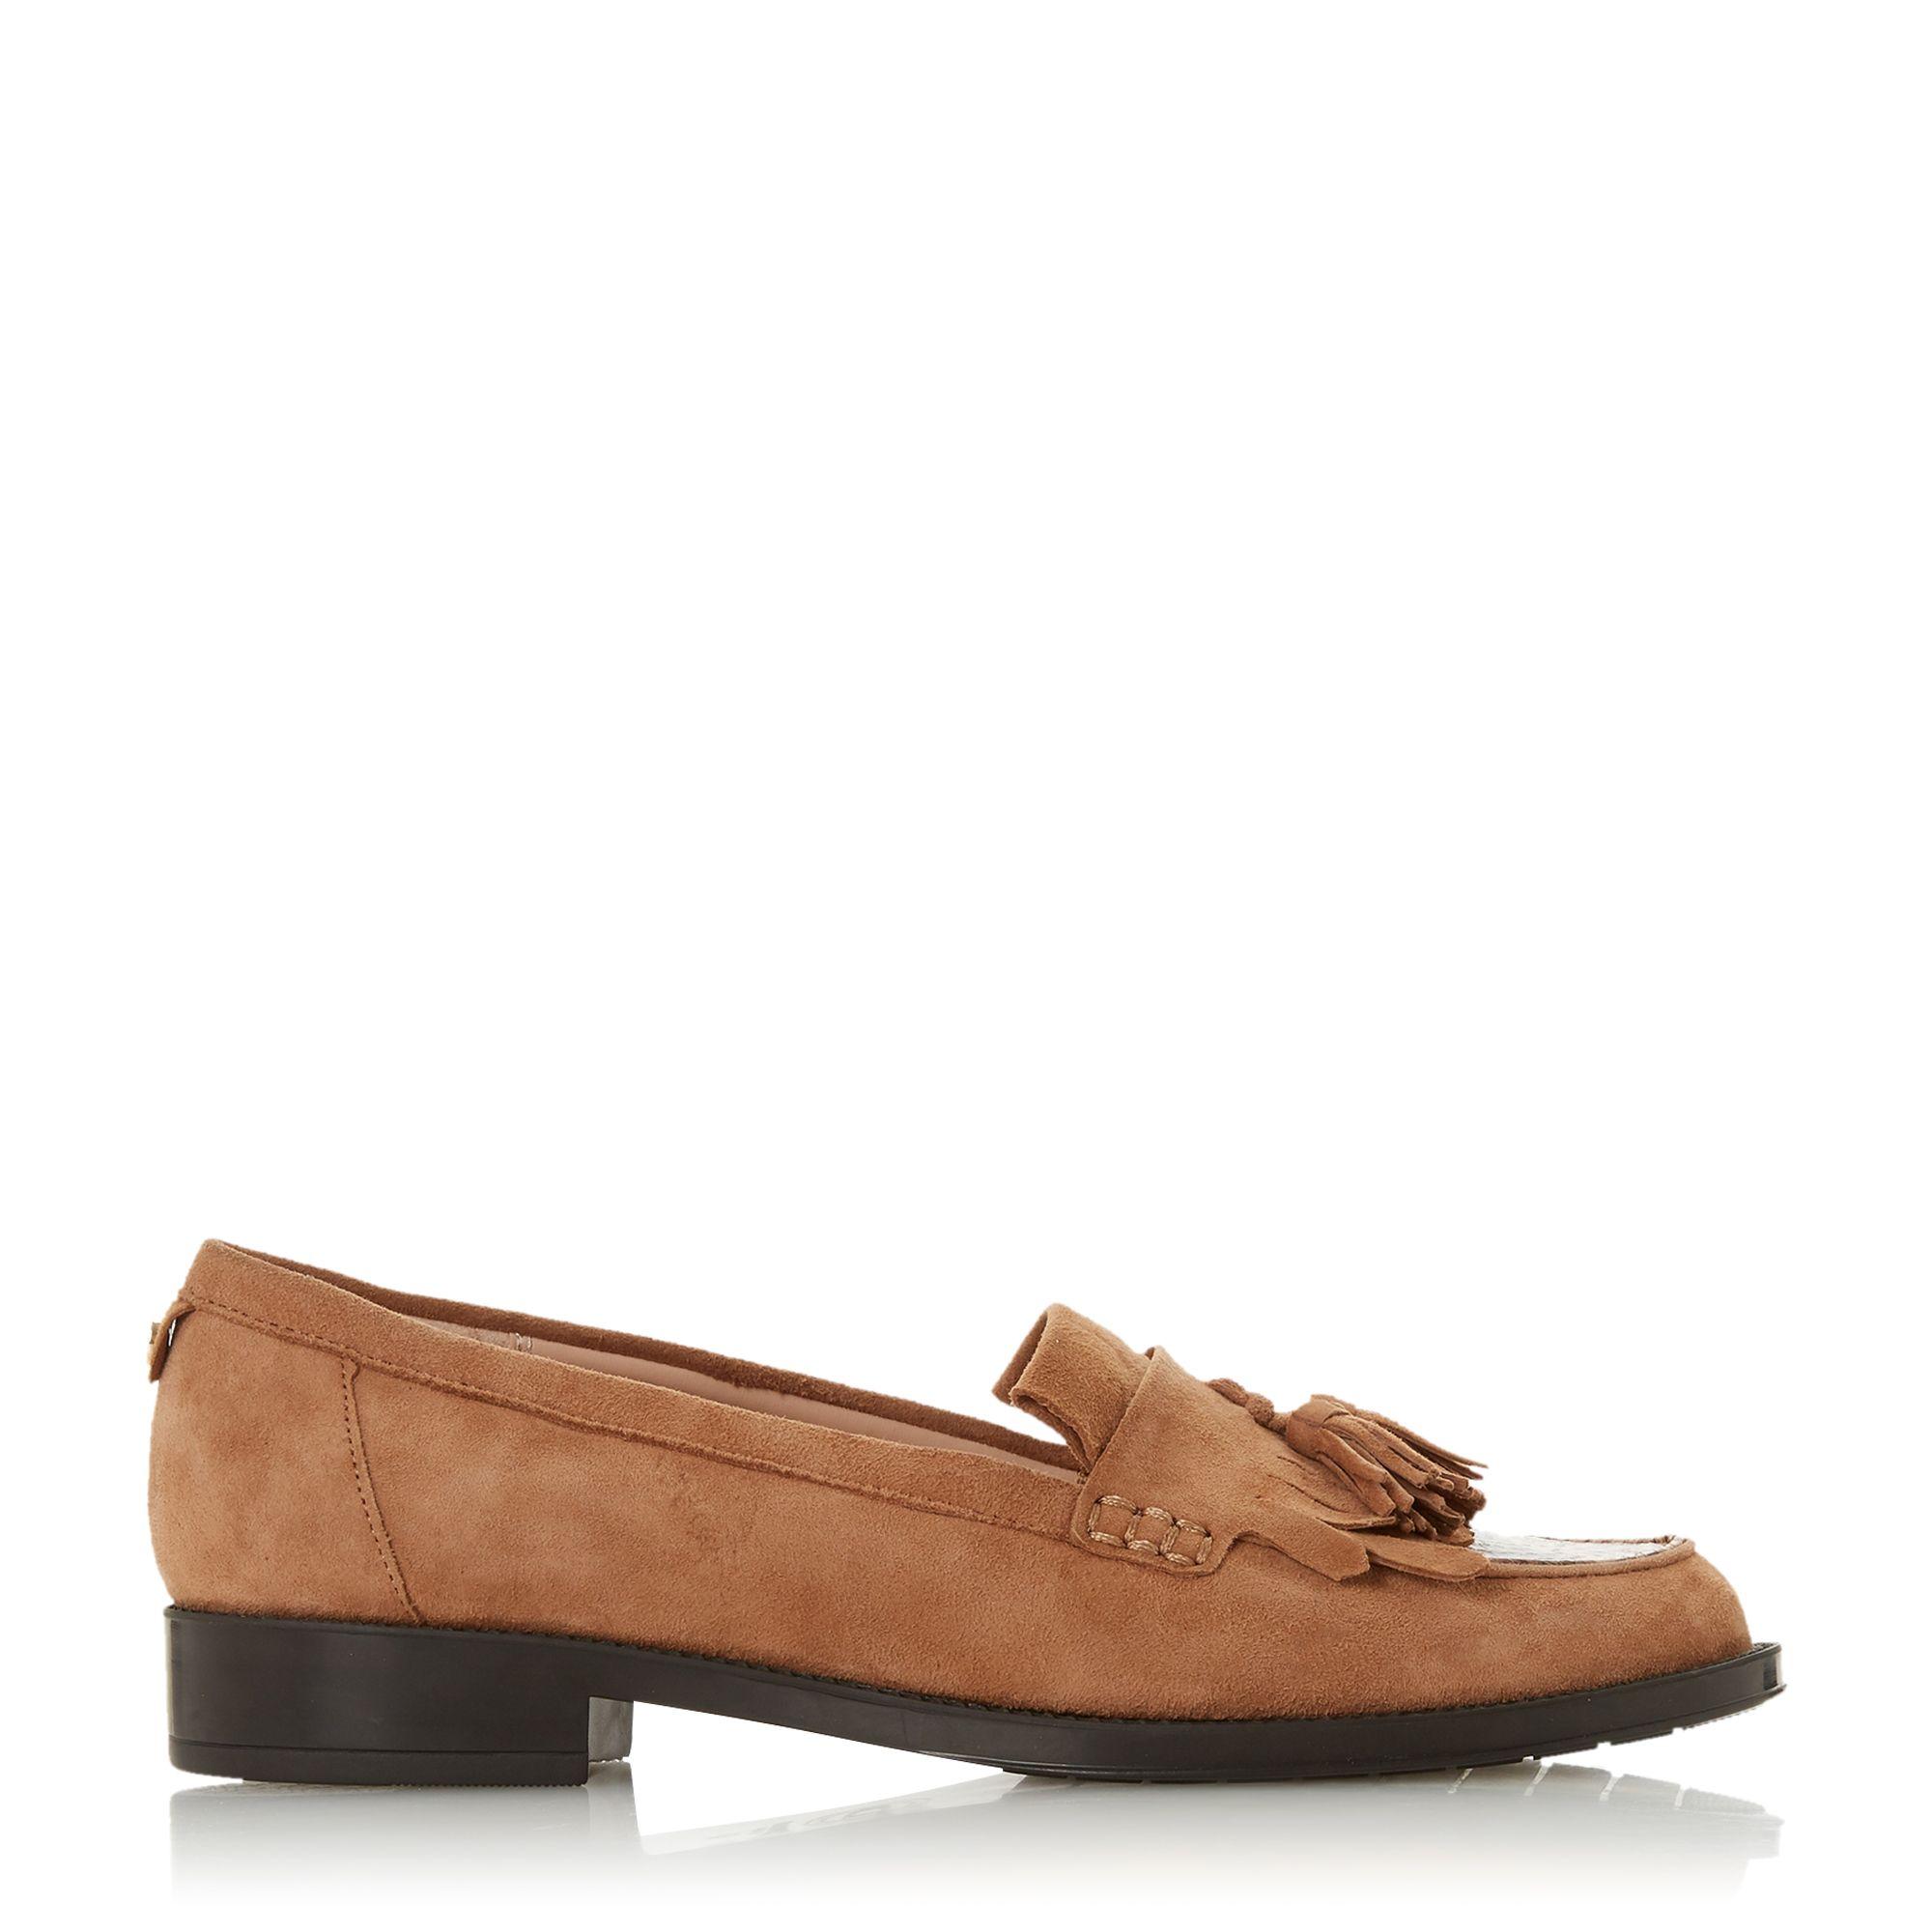 Dune Leather 'greatly' Block Heel Loafers in Camel (Brown) - Lyst